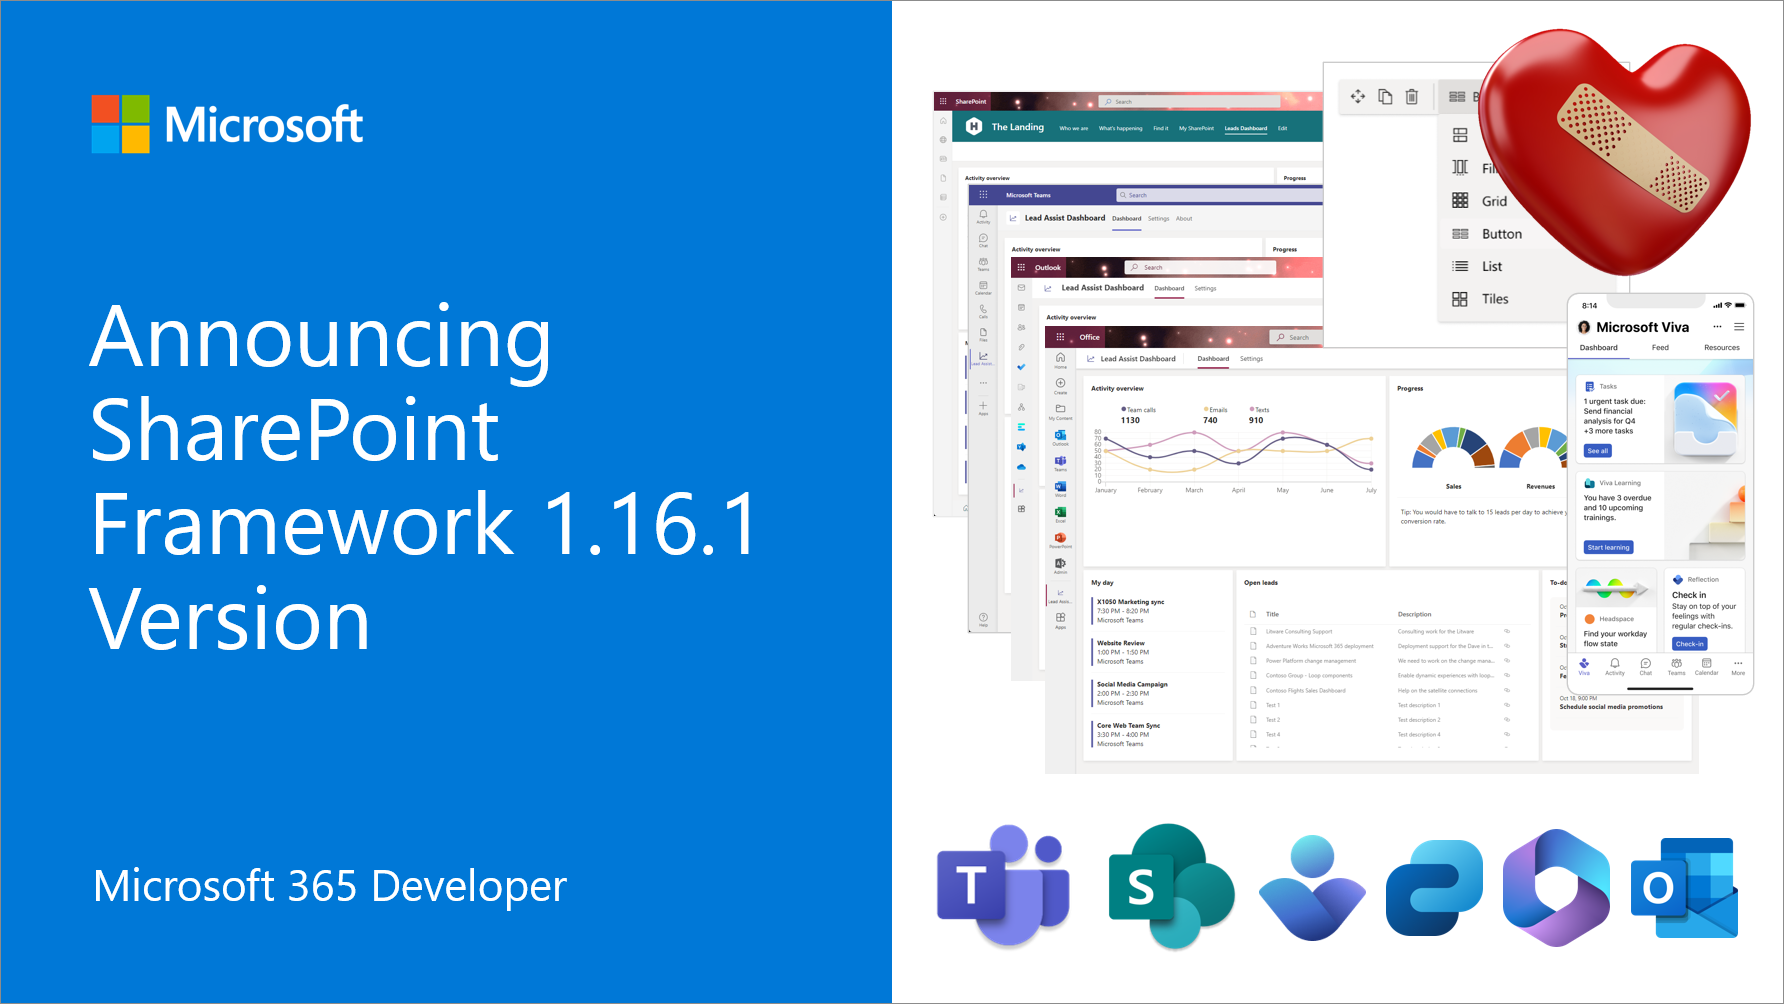 New SharePoint Framework version 1.16.1 is now available